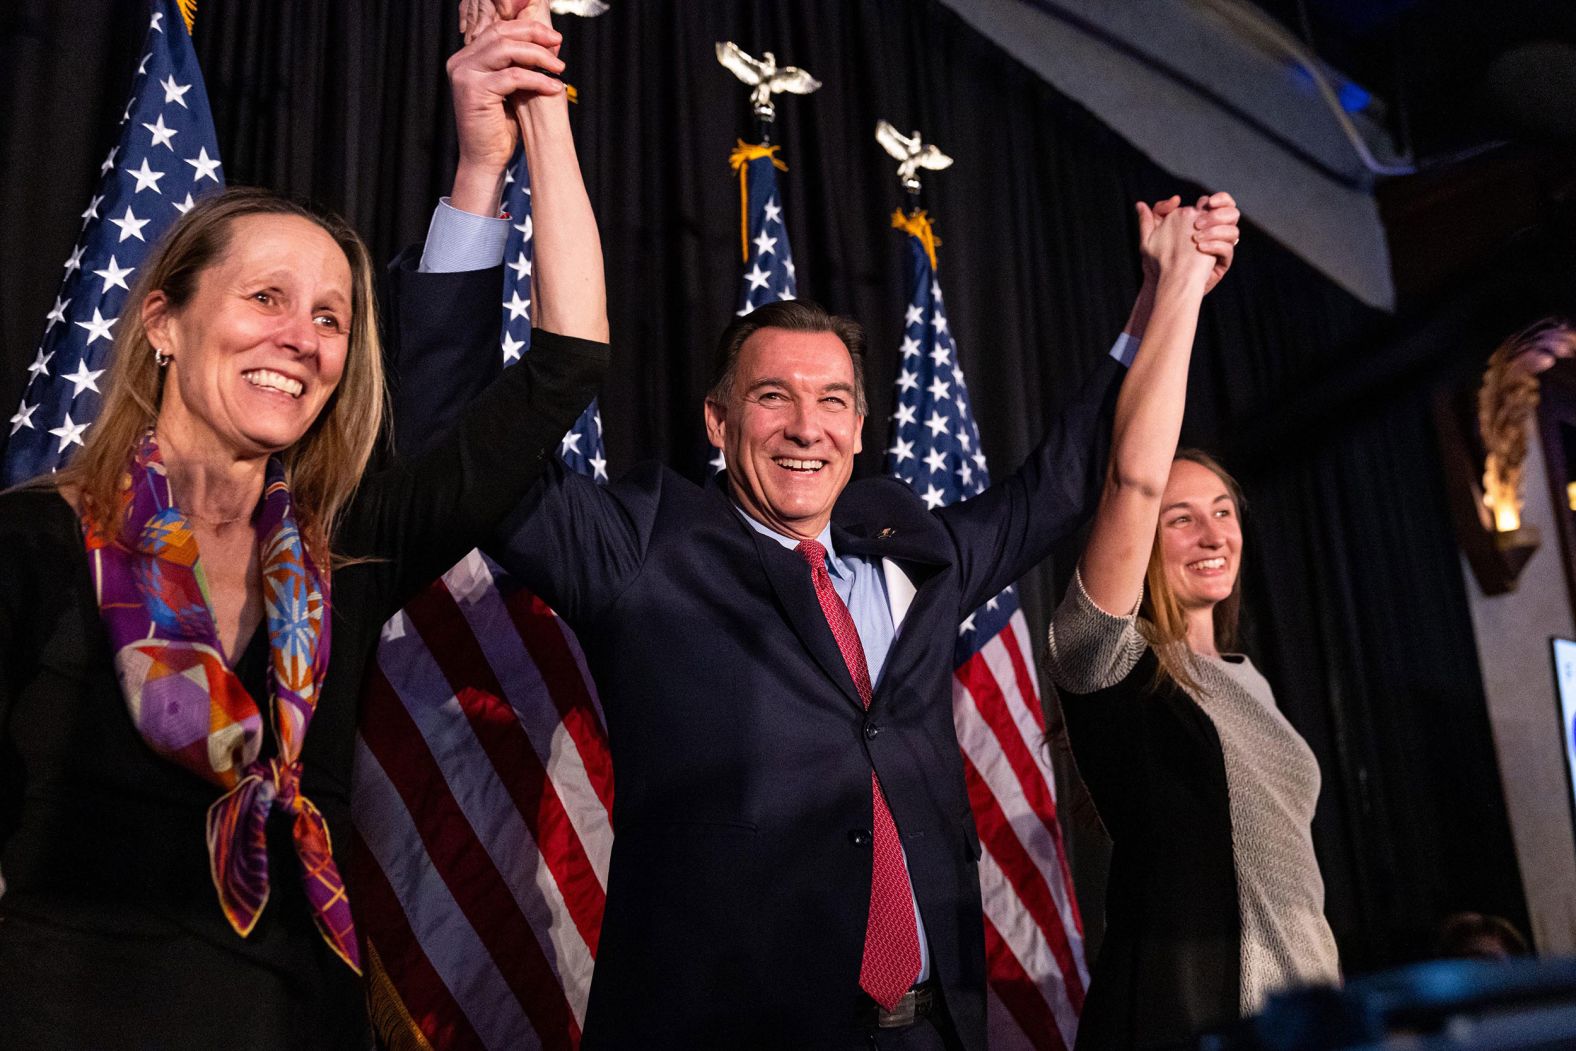 Former US Rep. Tom Suozzi appears with his wife, Helene, and his daughter, Caroline, at an election night party in Woodbury, New York, on Tuesday, February 13. Suozzi, a Democrat, won the special election to replace disgraced Republican George Santos in the House of Representatives. The result will further shrink the House GOP's narrow majority.